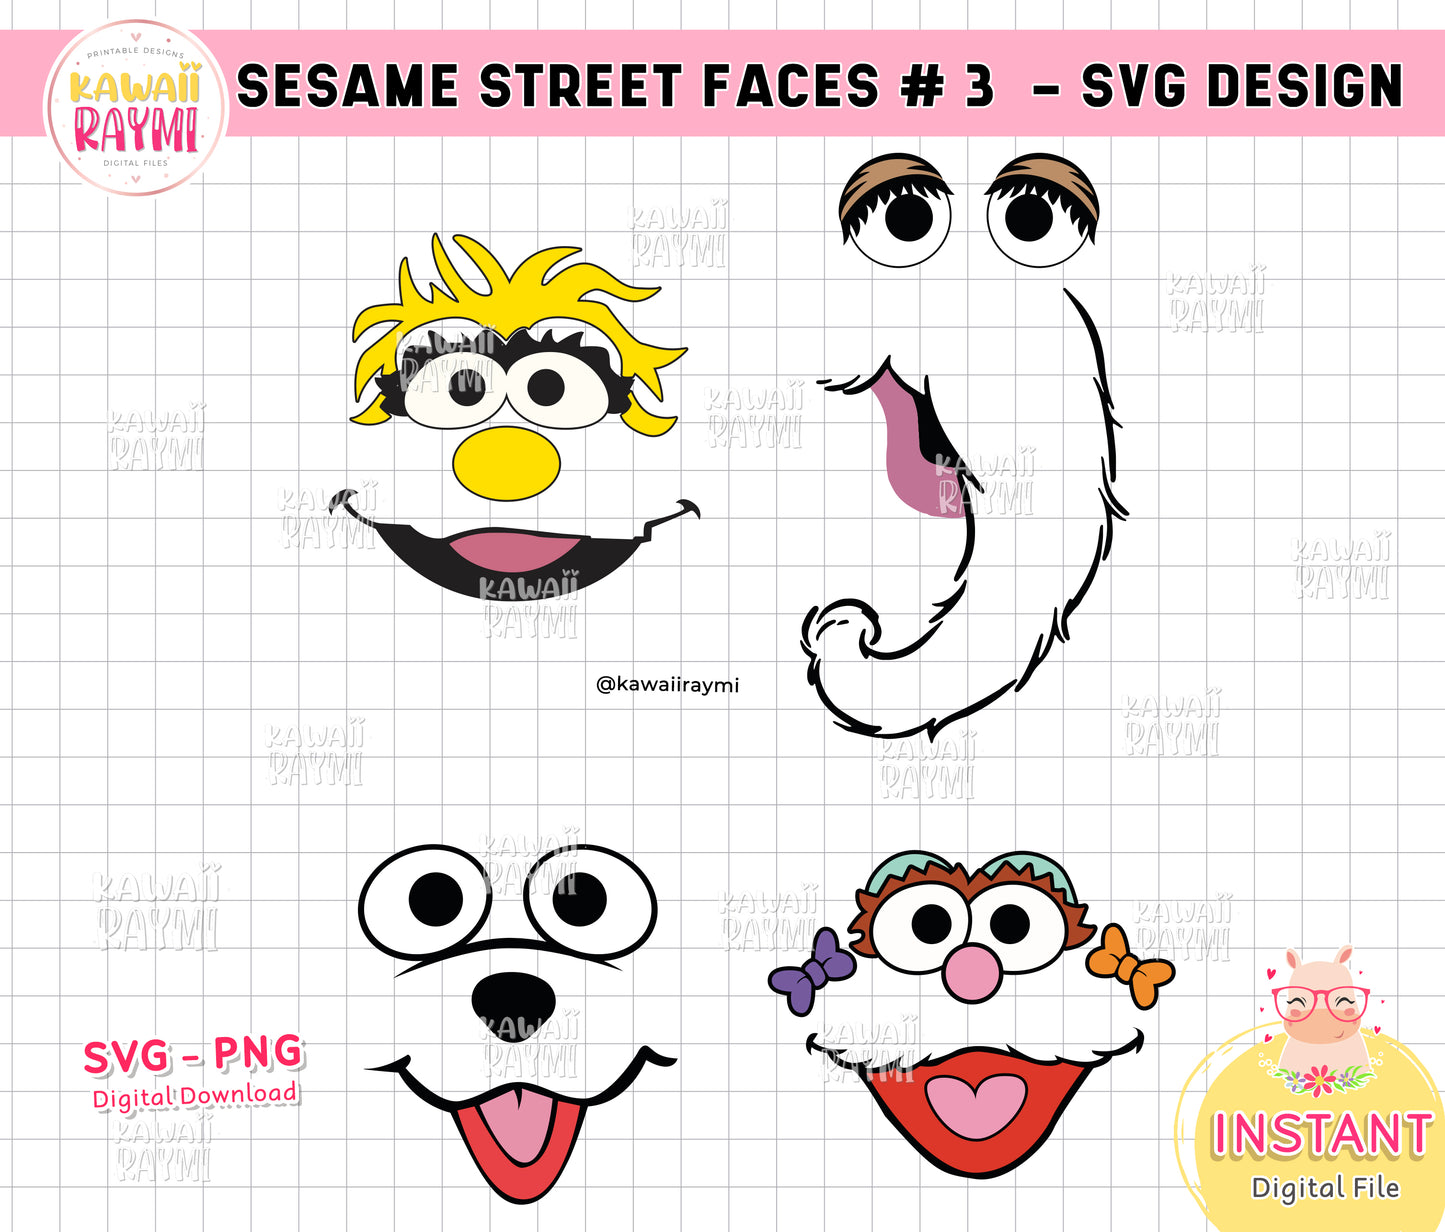 Sesame Street Characters Faces svg, png - Instant Digital File- LAYERED